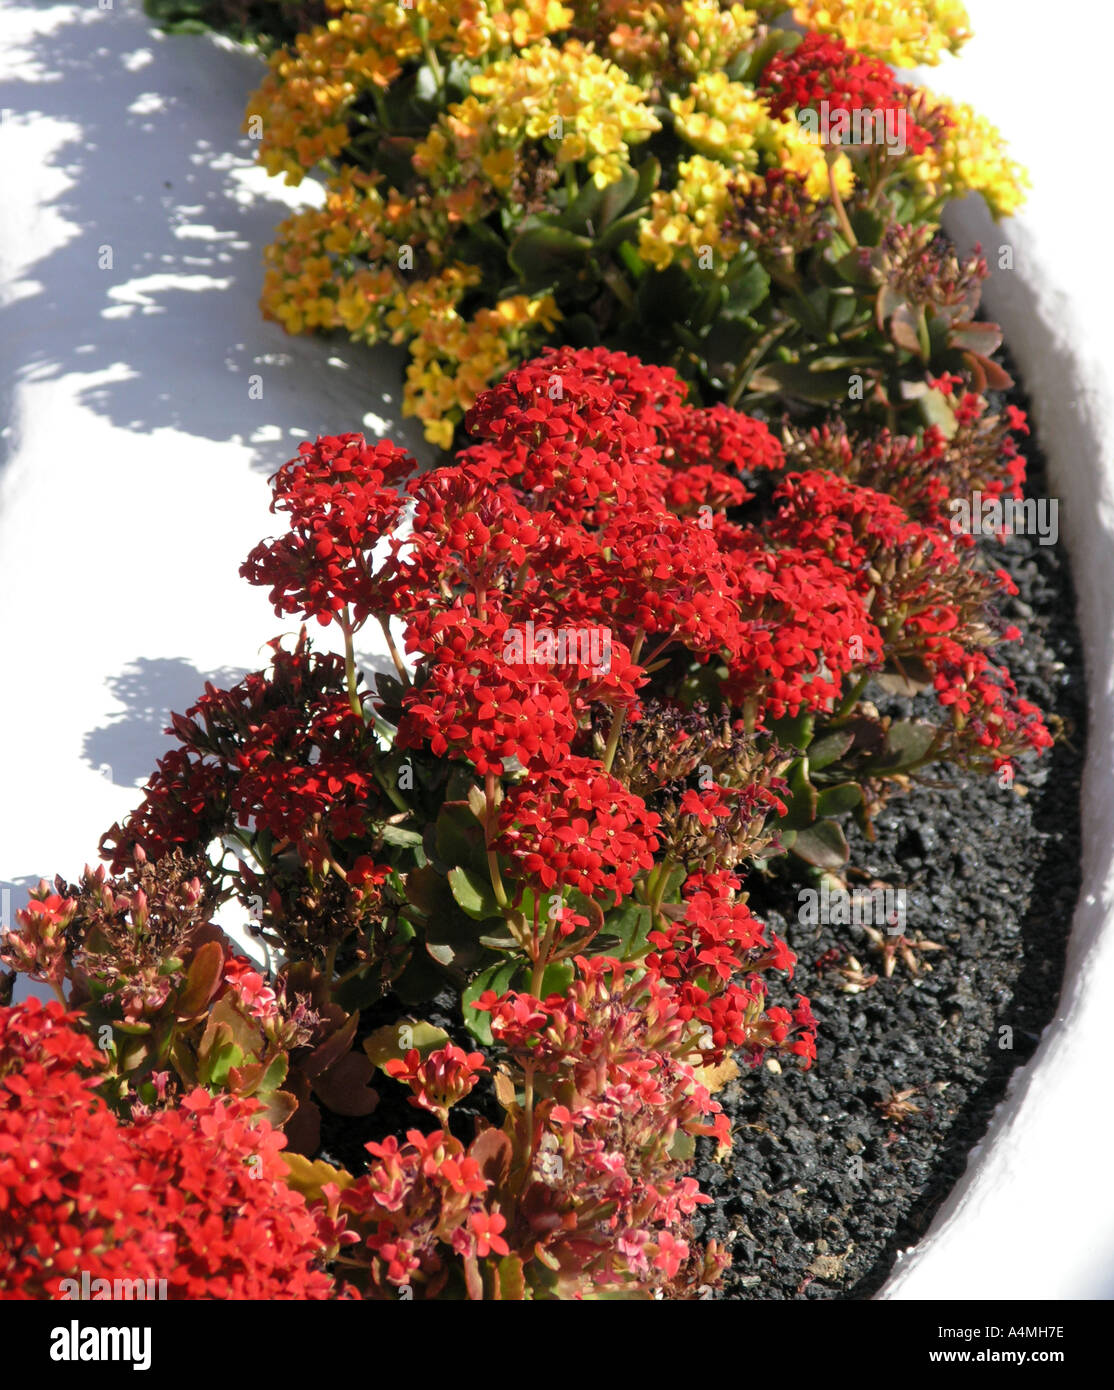 Red and yellow flowers in a garden border with white paving Stock Photo